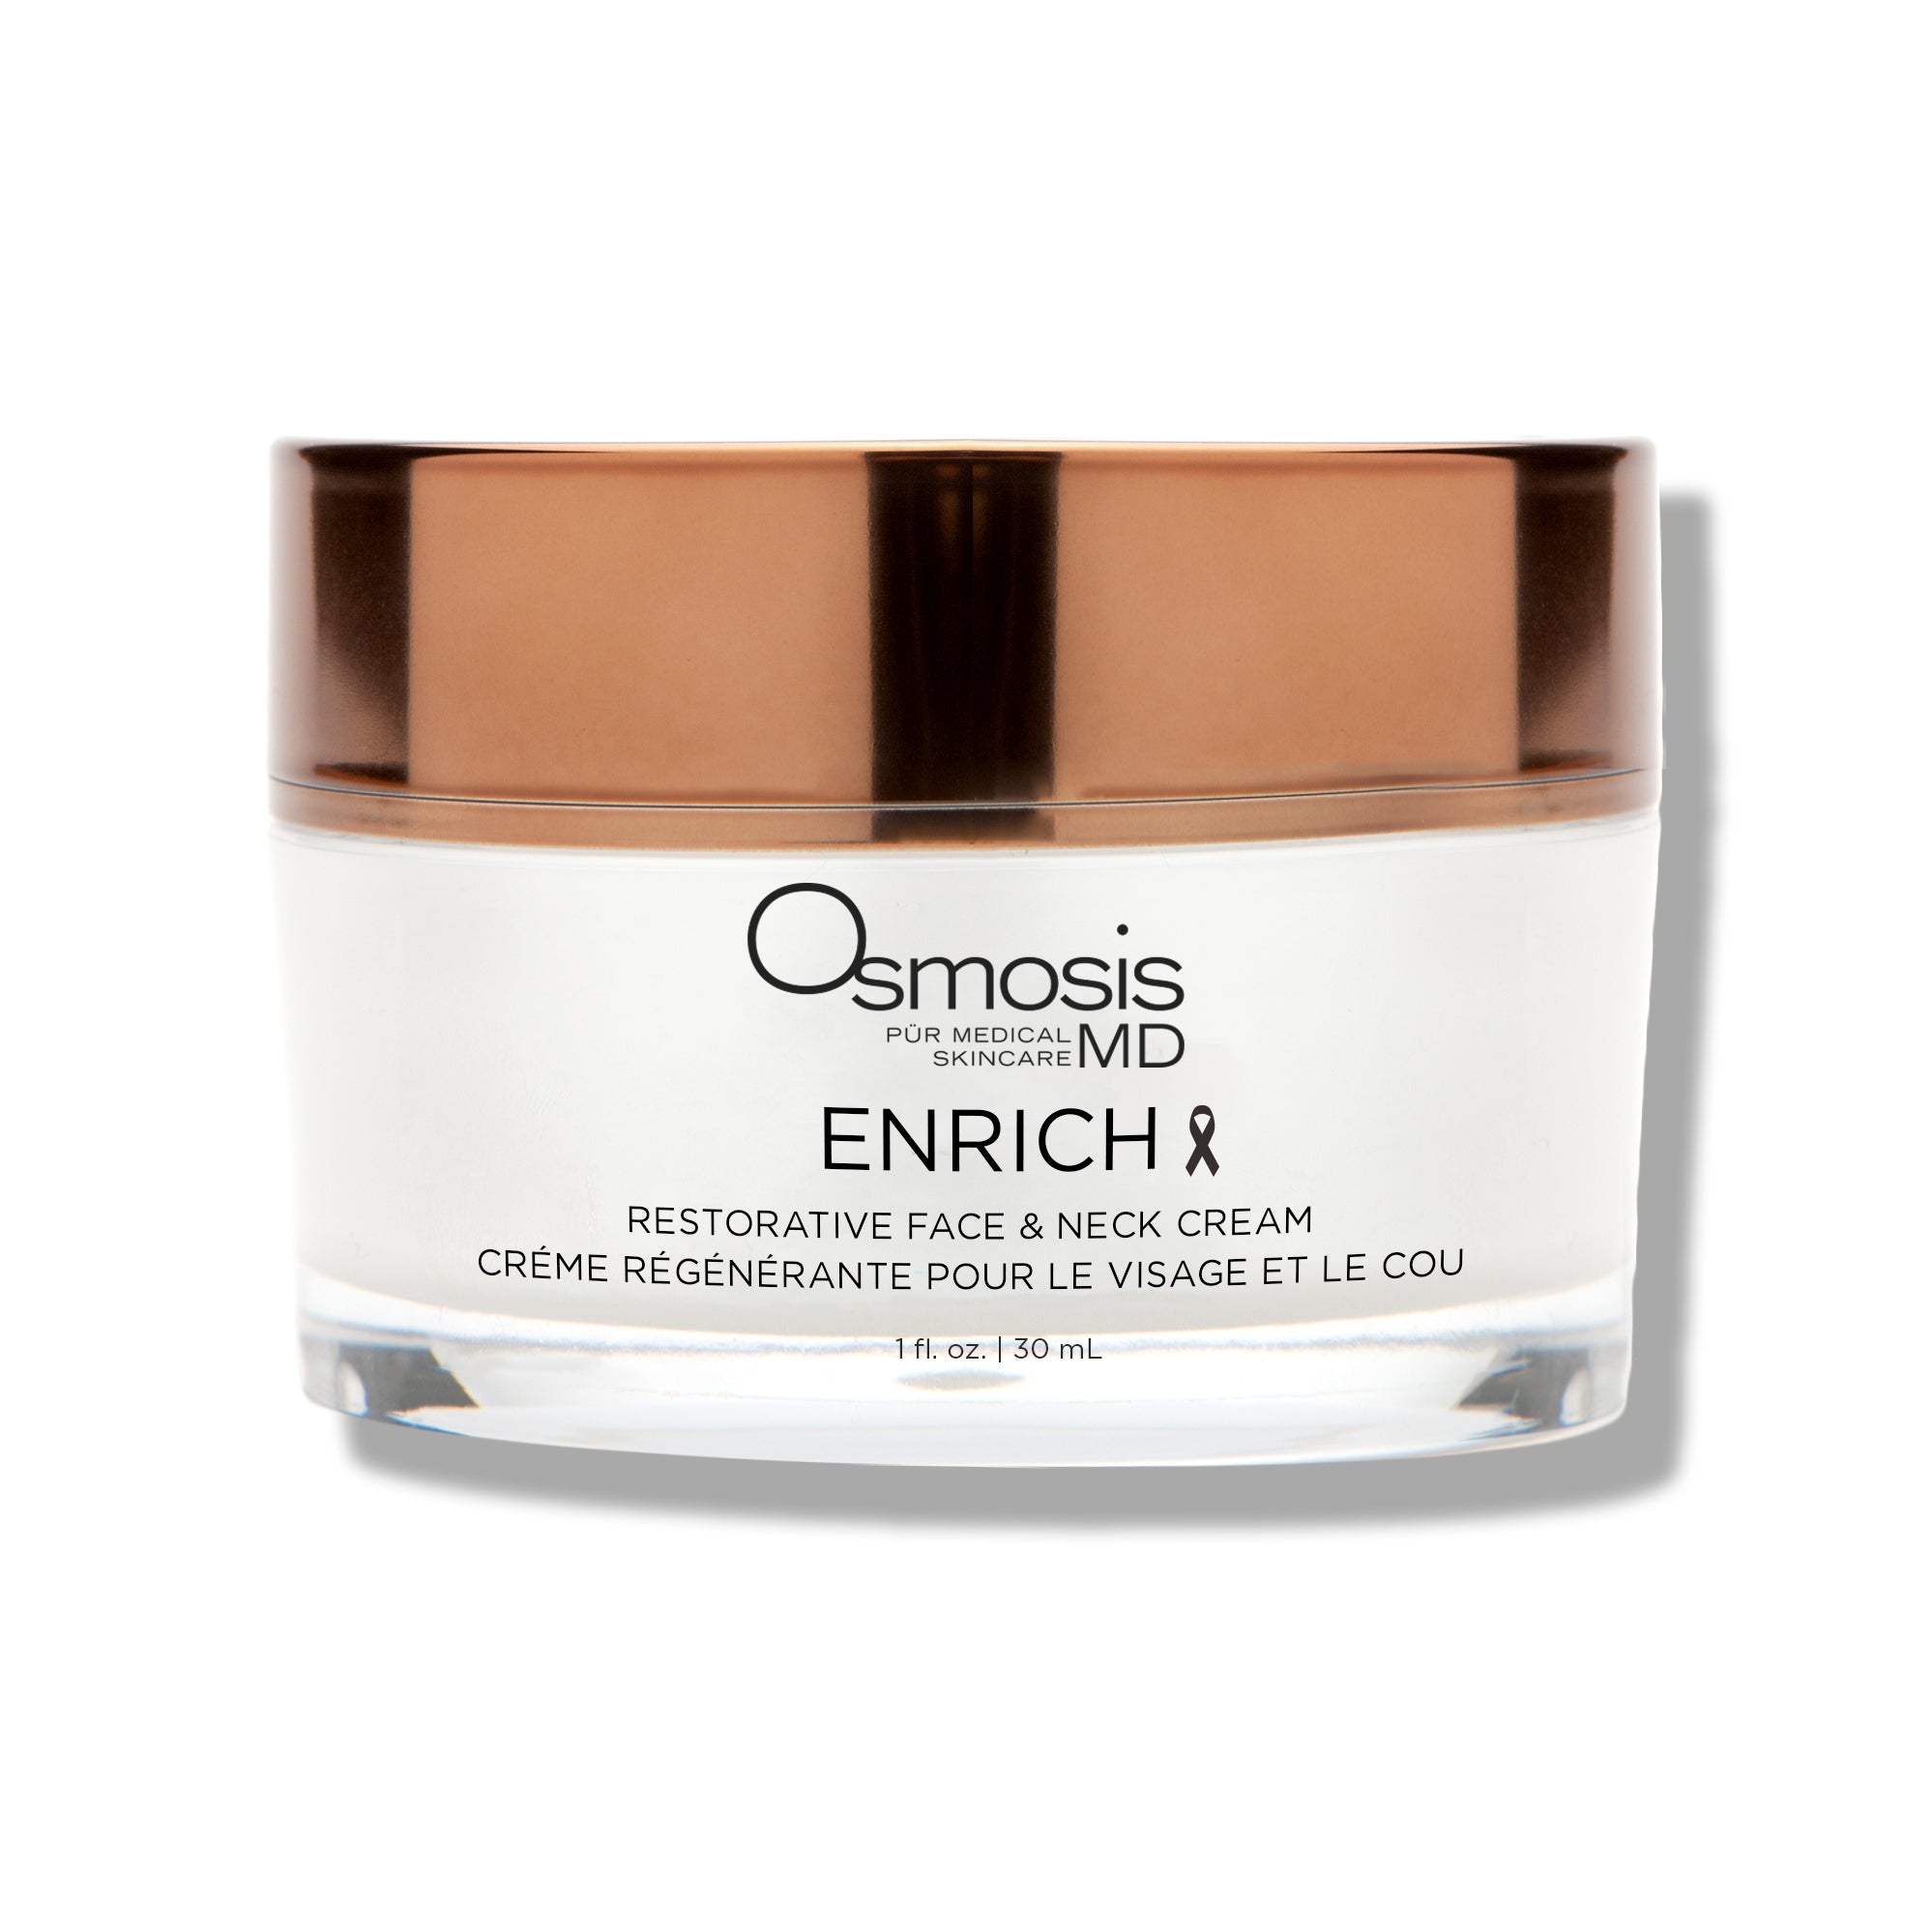 Osmosis MD Enrich Face & Neck Cream 1 fl. oz. clear jar with copper top. 